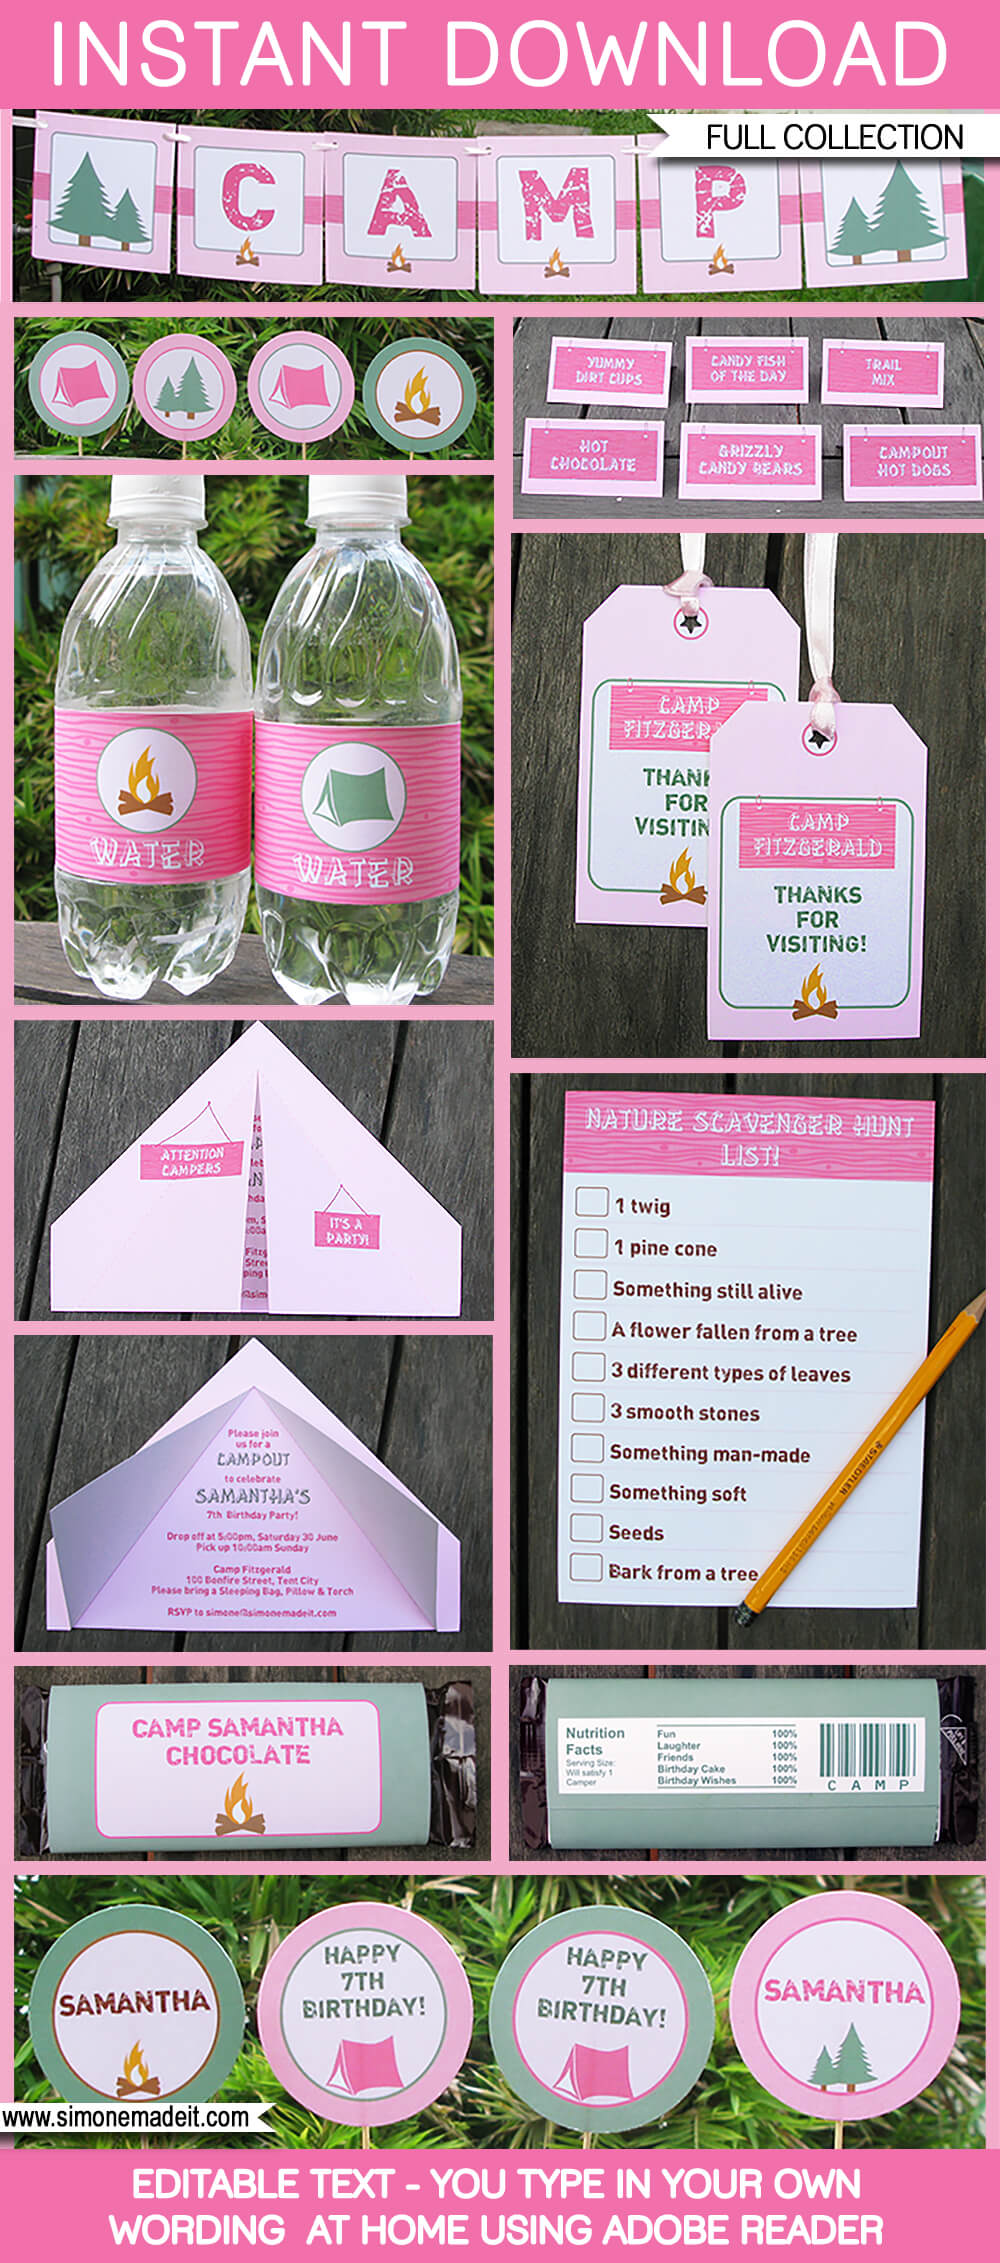 Pink Camping Party Printables, Invitations & Decorations | Tent Invitation | Birthday Party | Editable Theme Templates | INSTANT DOWNLOAD $12.50 via SIMONEmadeit.com